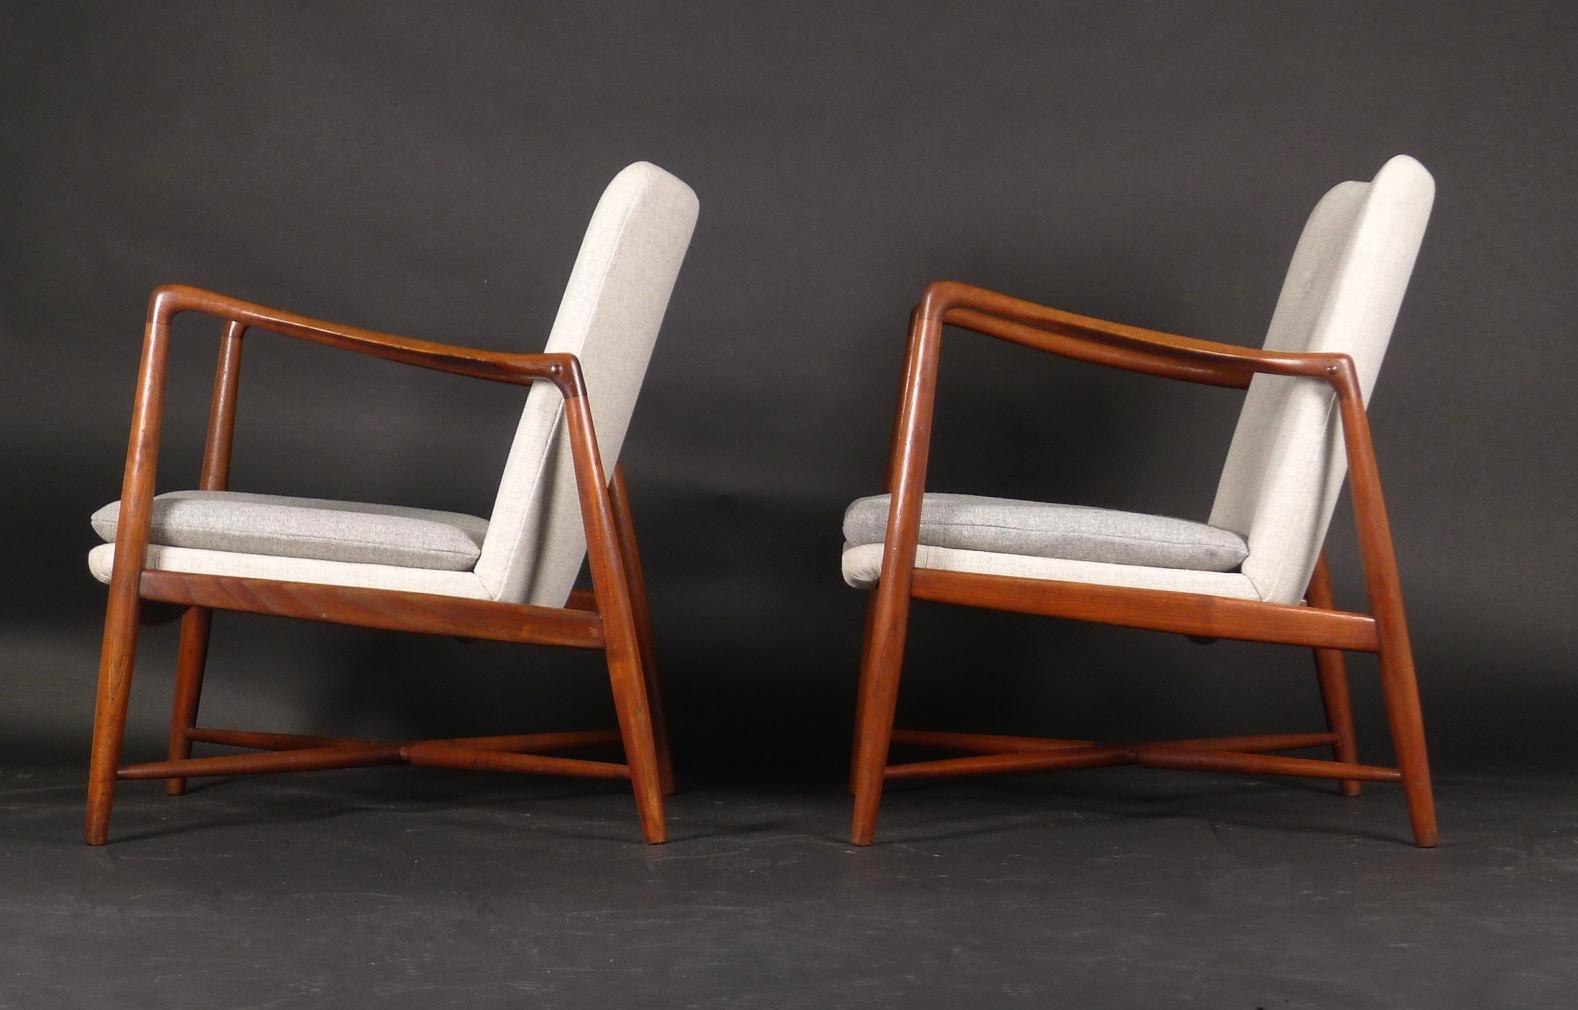 Finn Juhl, Pair of Fireplace Chairs, model BO59, by Bovirke, designed 1946 In Excellent Condition For Sale In Wargrave, Berkshire